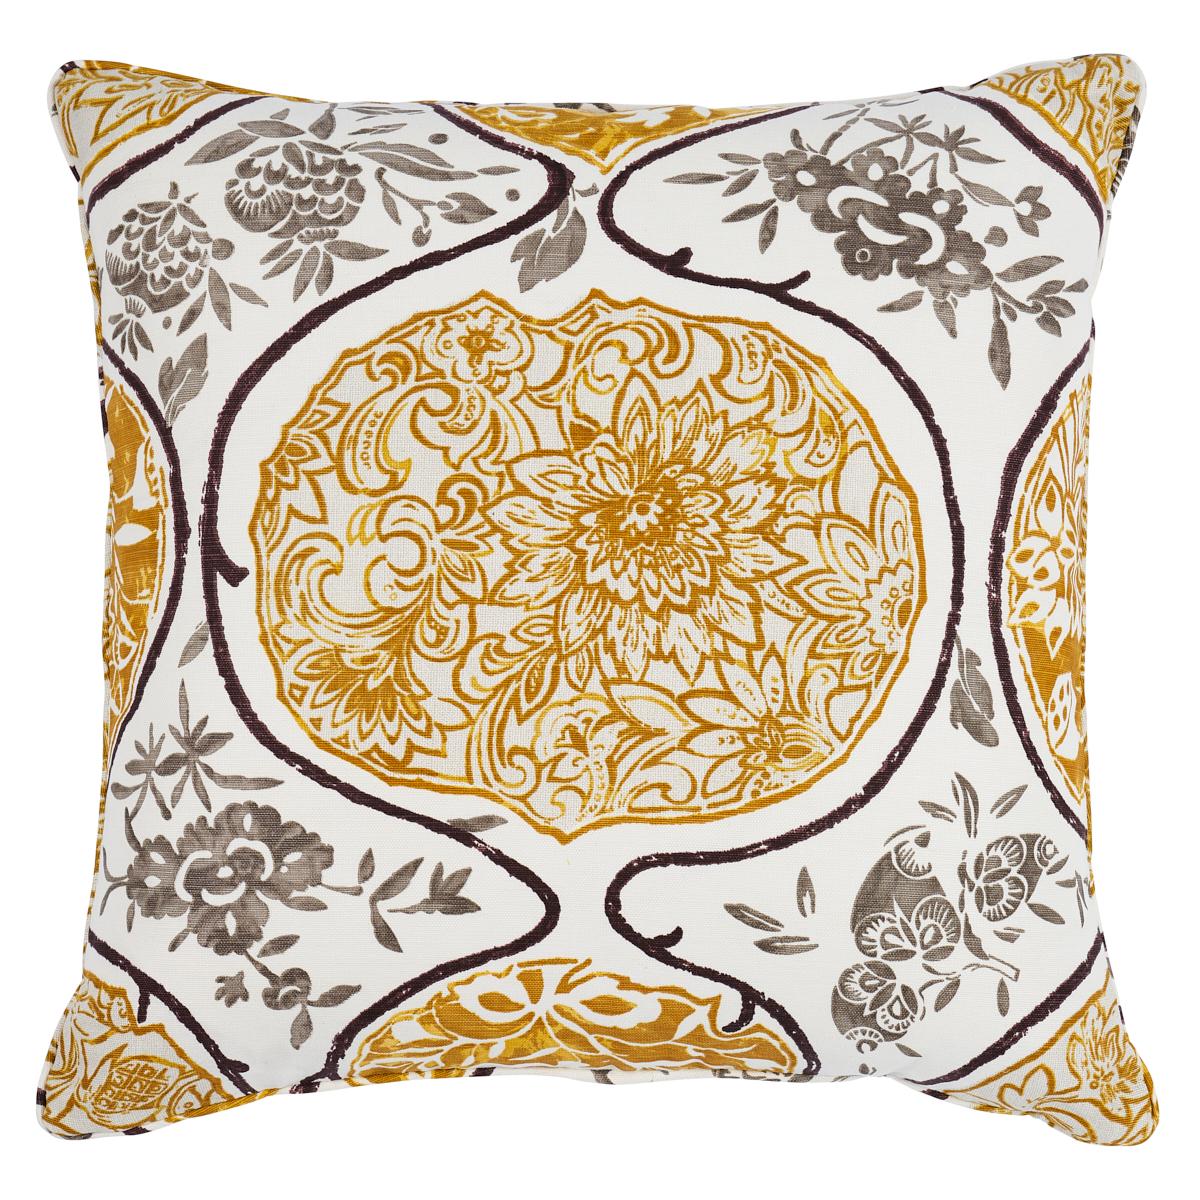 This pillow features Noelia Tape with a Knife Edge finish. It's intricate, scrolling design is rendered in delicate, corded embroidery. Body of pillow is Venetian Silk Velvet. Pillow includes a feather/down fill insert and hidden zipper